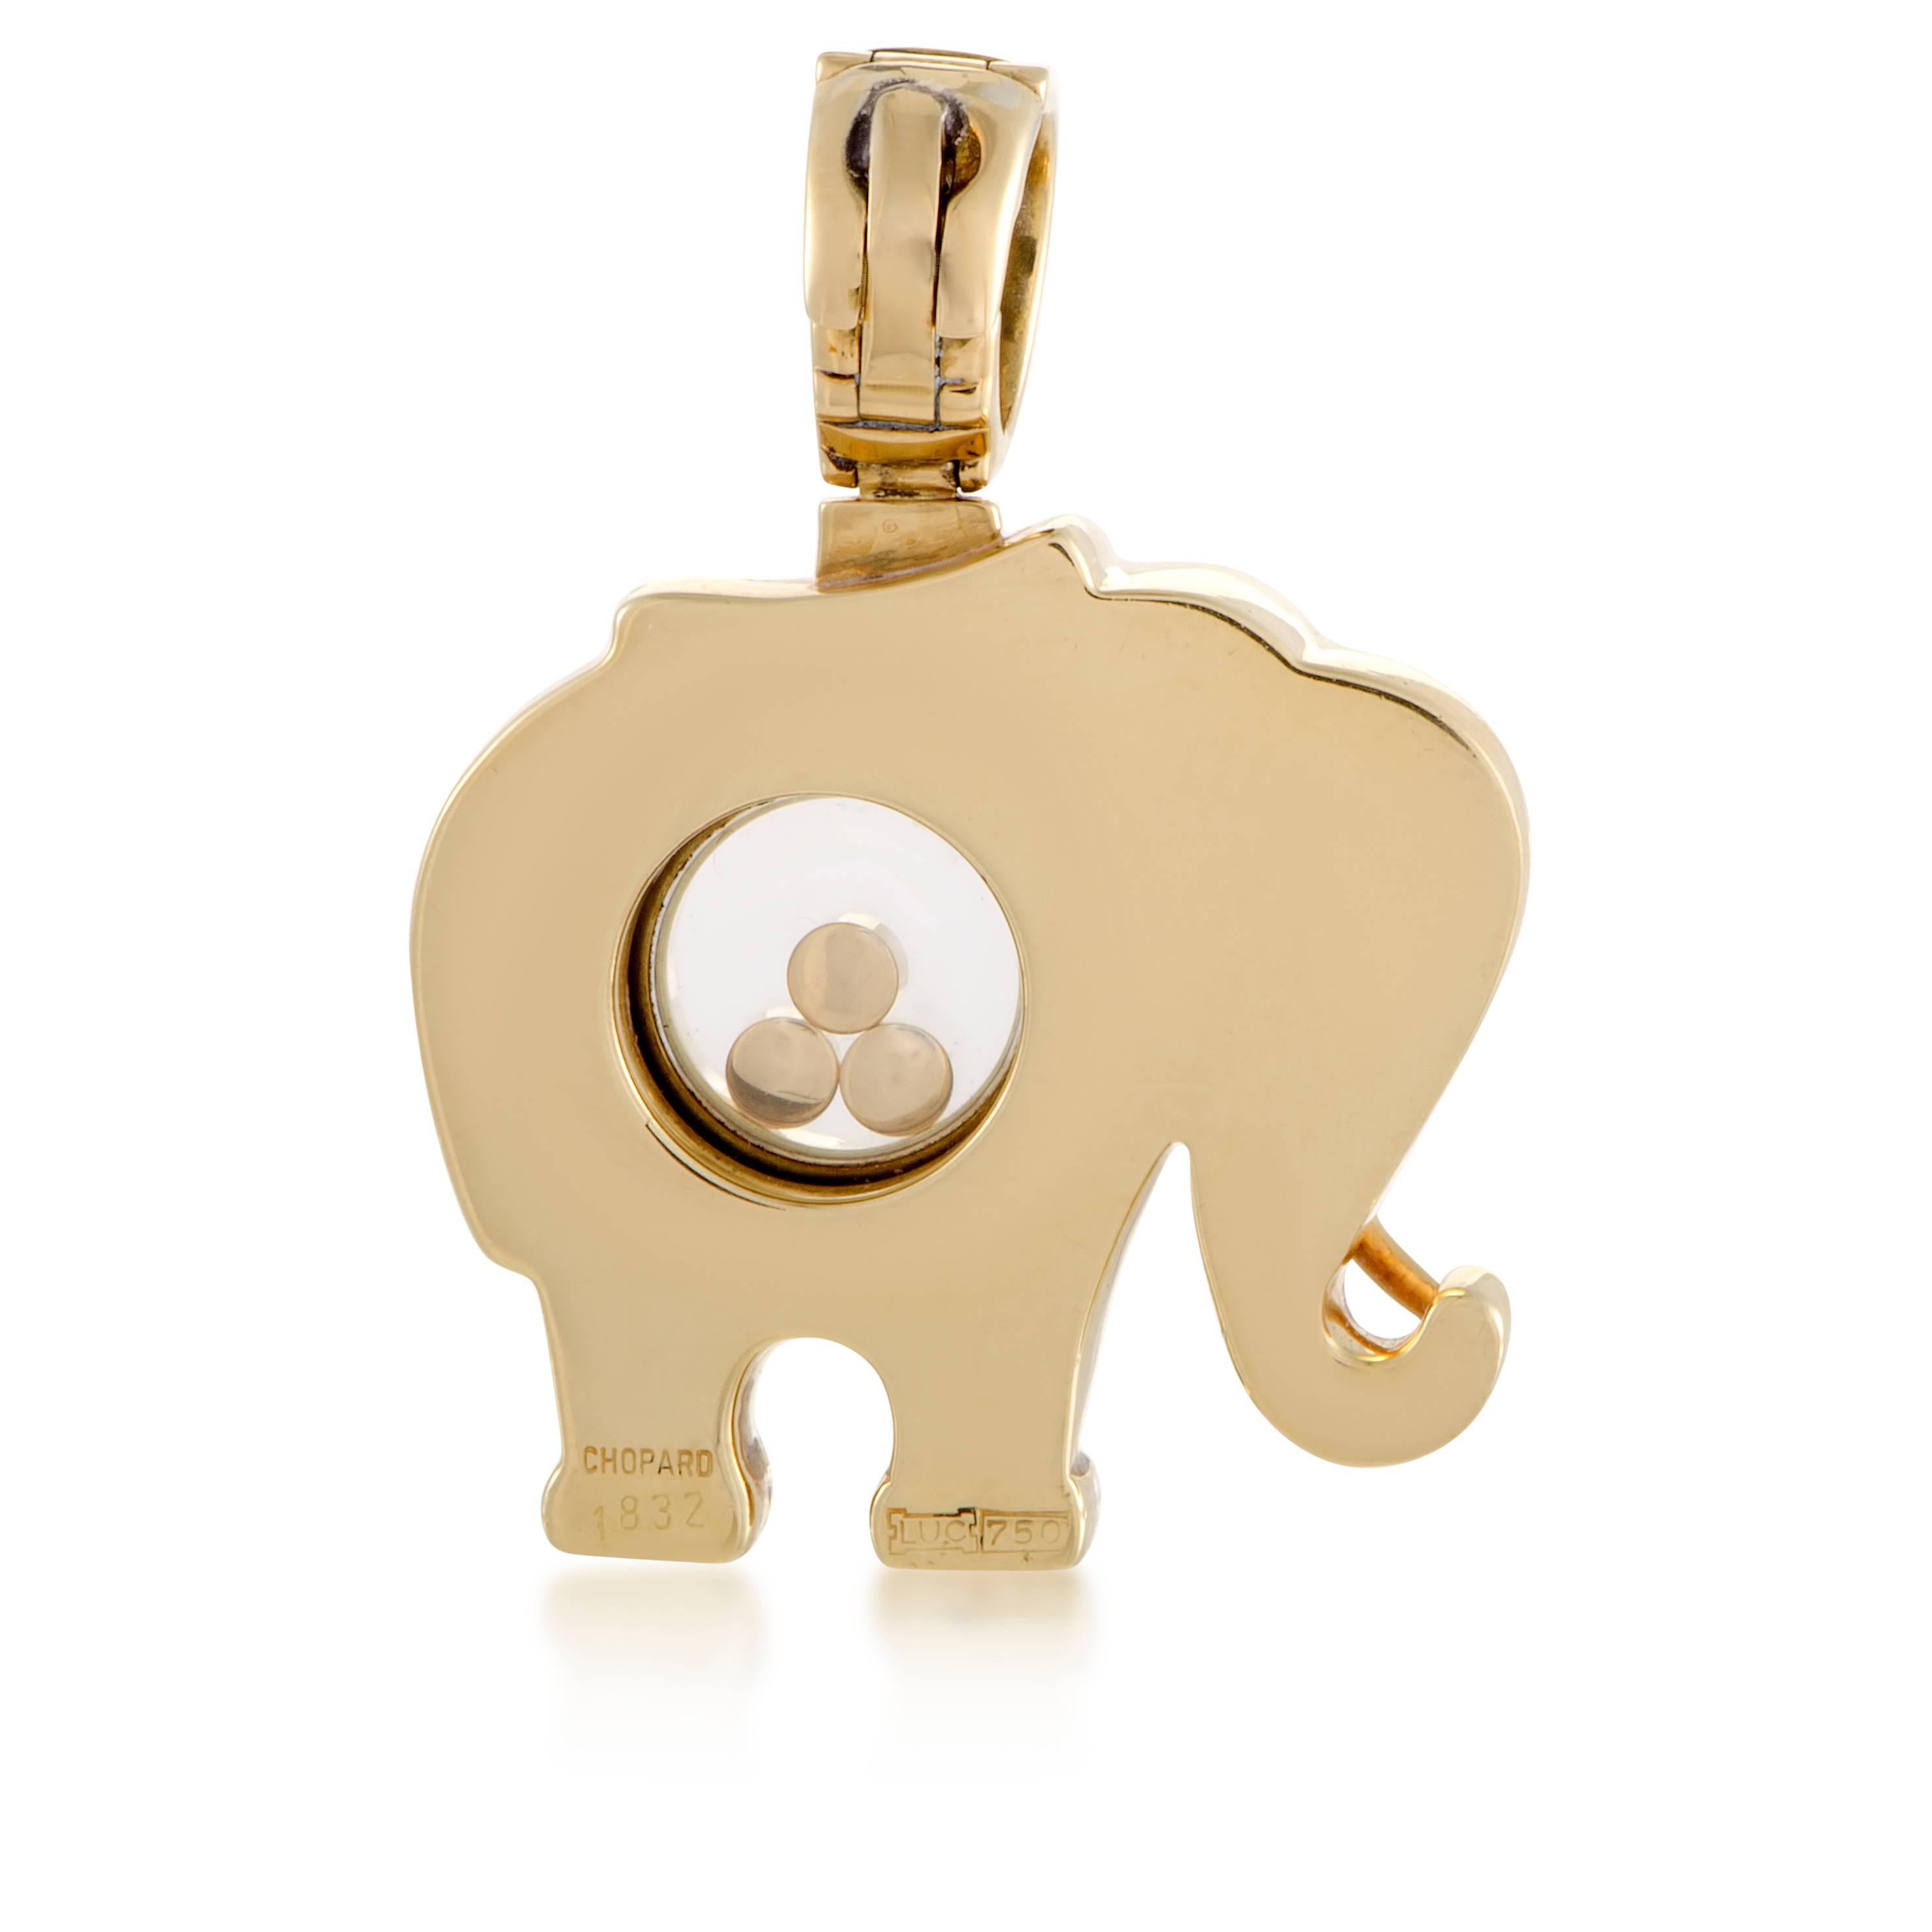 Once again showing their admiration for adorable motifs and engaging wandering diamonds, Chopard present this nifty elephant-shaped pendant made of 18K yellow gold and embellished with sparkling diamonds totaling 0.75ct.
Included Items: